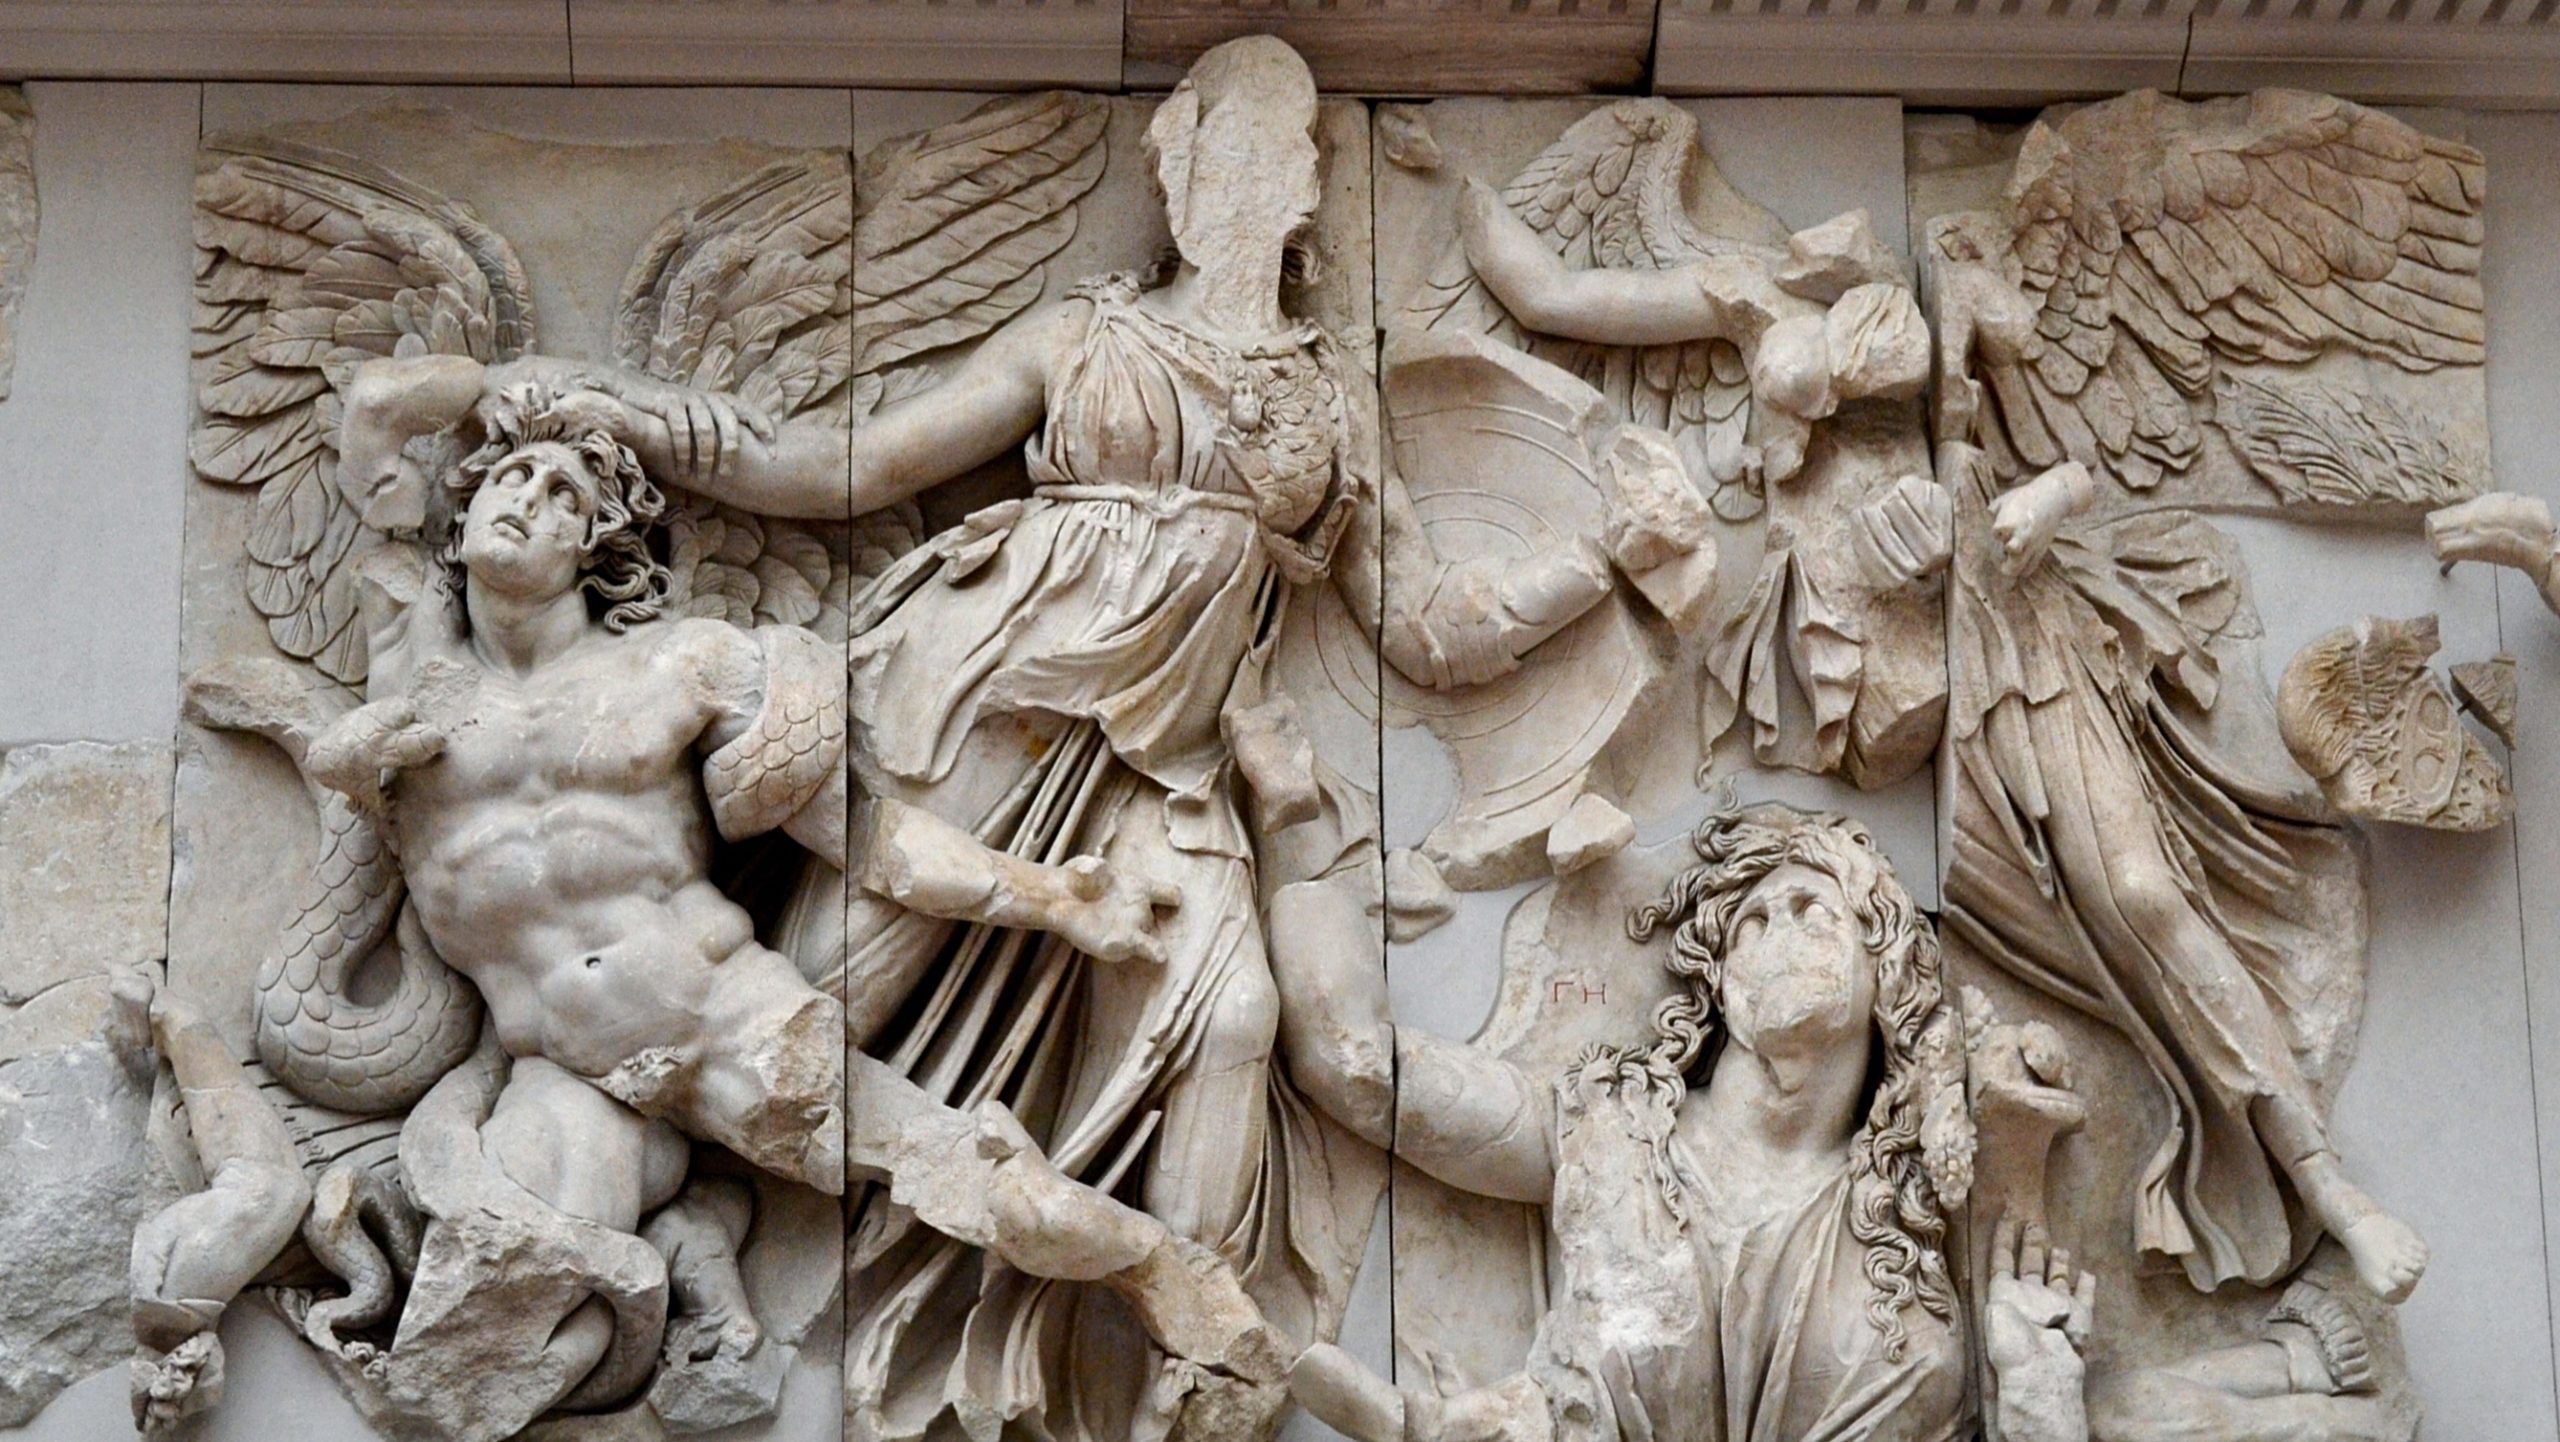 <p>-detail of the gigantomachy frieze of the Great Altar of Zeus at Pergamon (restored) -High relief -Coming into the viewers space -Emotional essence -Interaction with environment -Intense drama -PATHOS -Deeply carved</p>